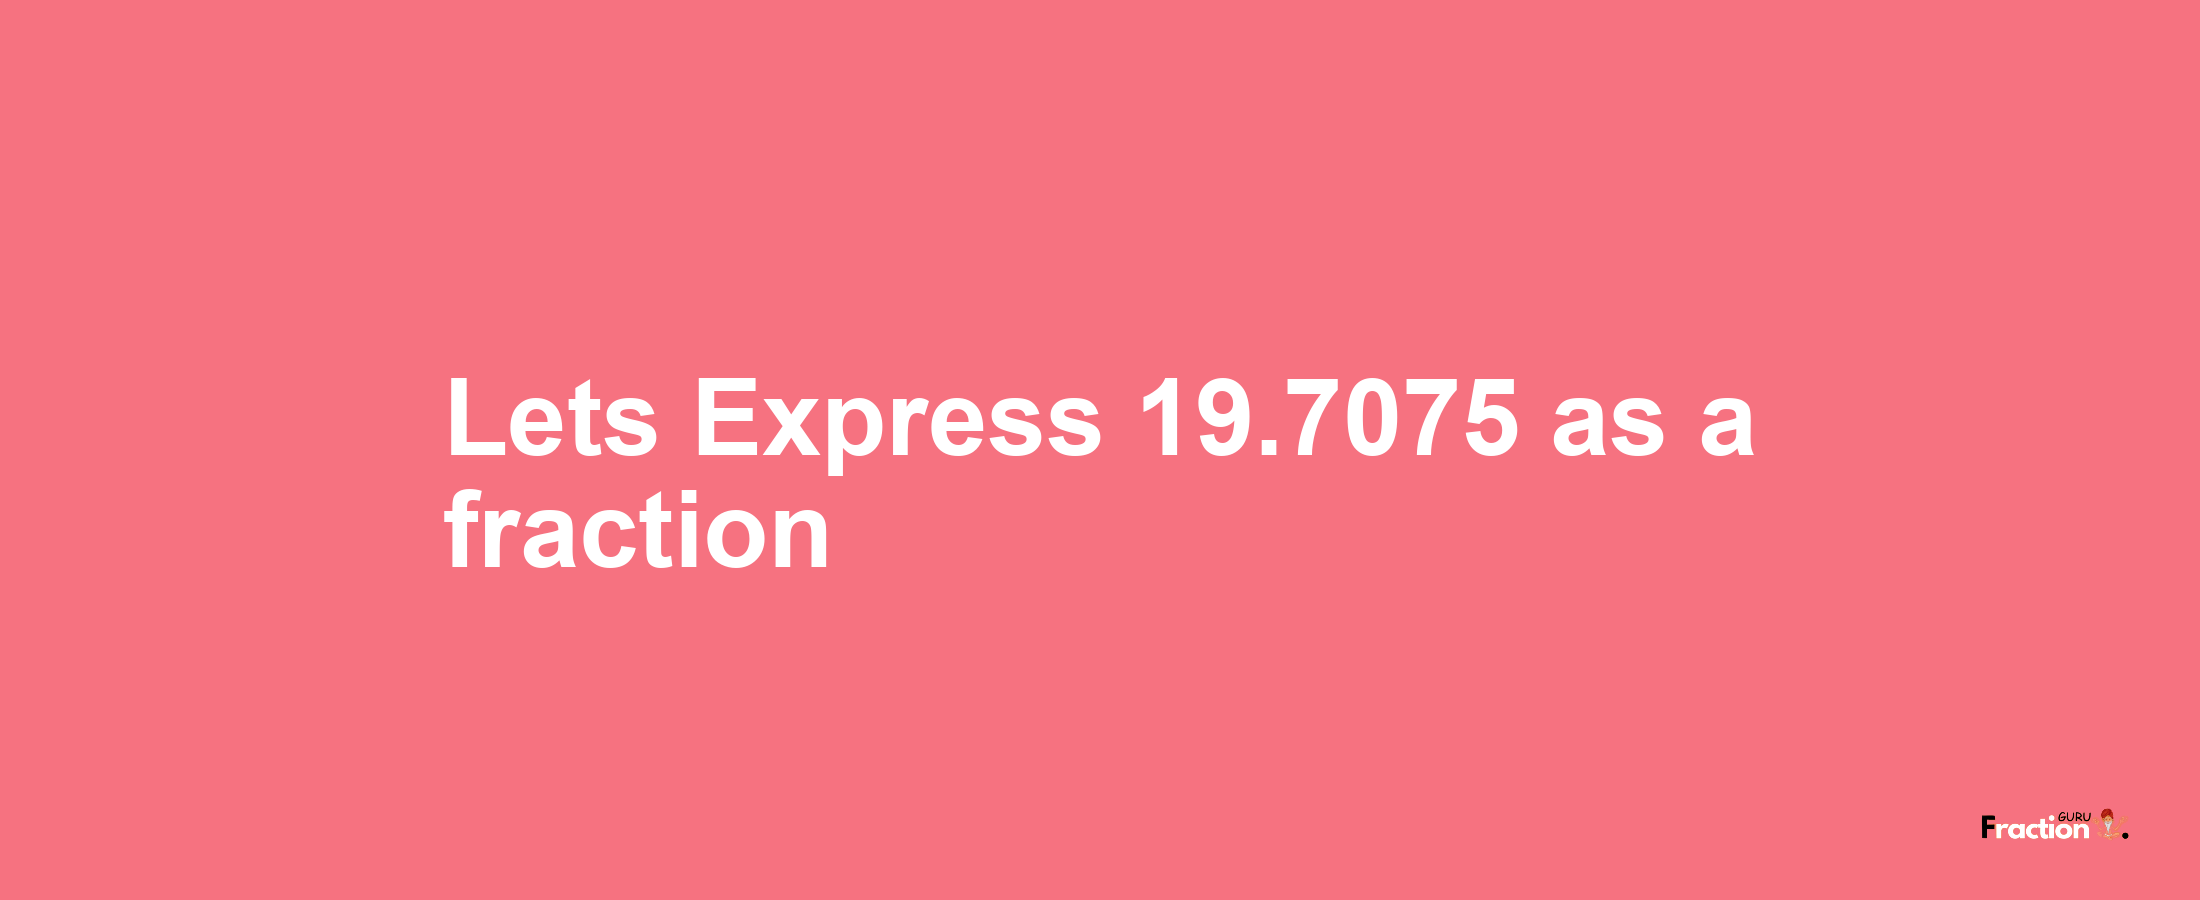 Lets Express 19.7075 as afraction